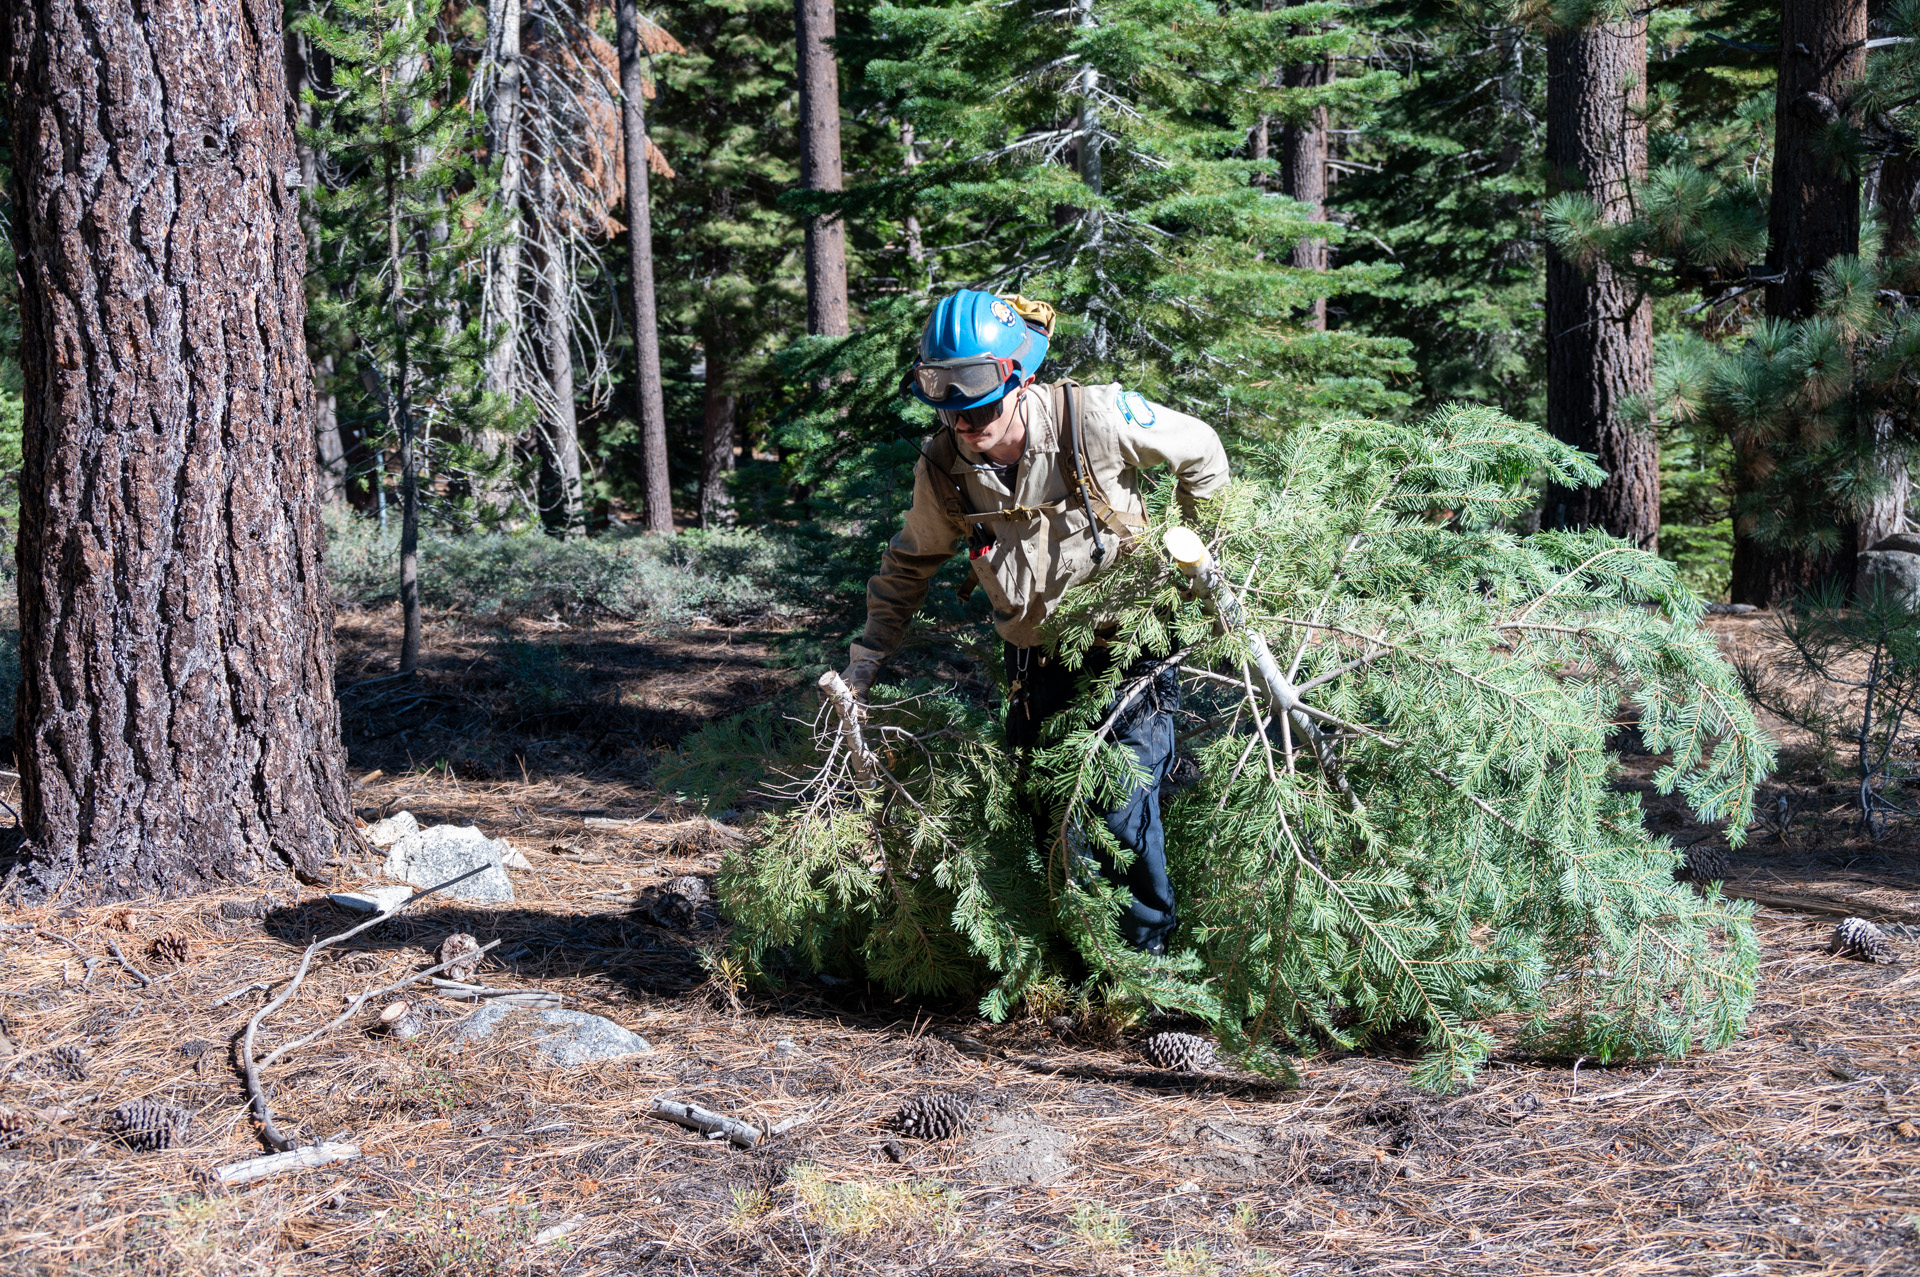 A CAL FIRE California Conservation Corspmember thinning Conservancy land in El Dorado County